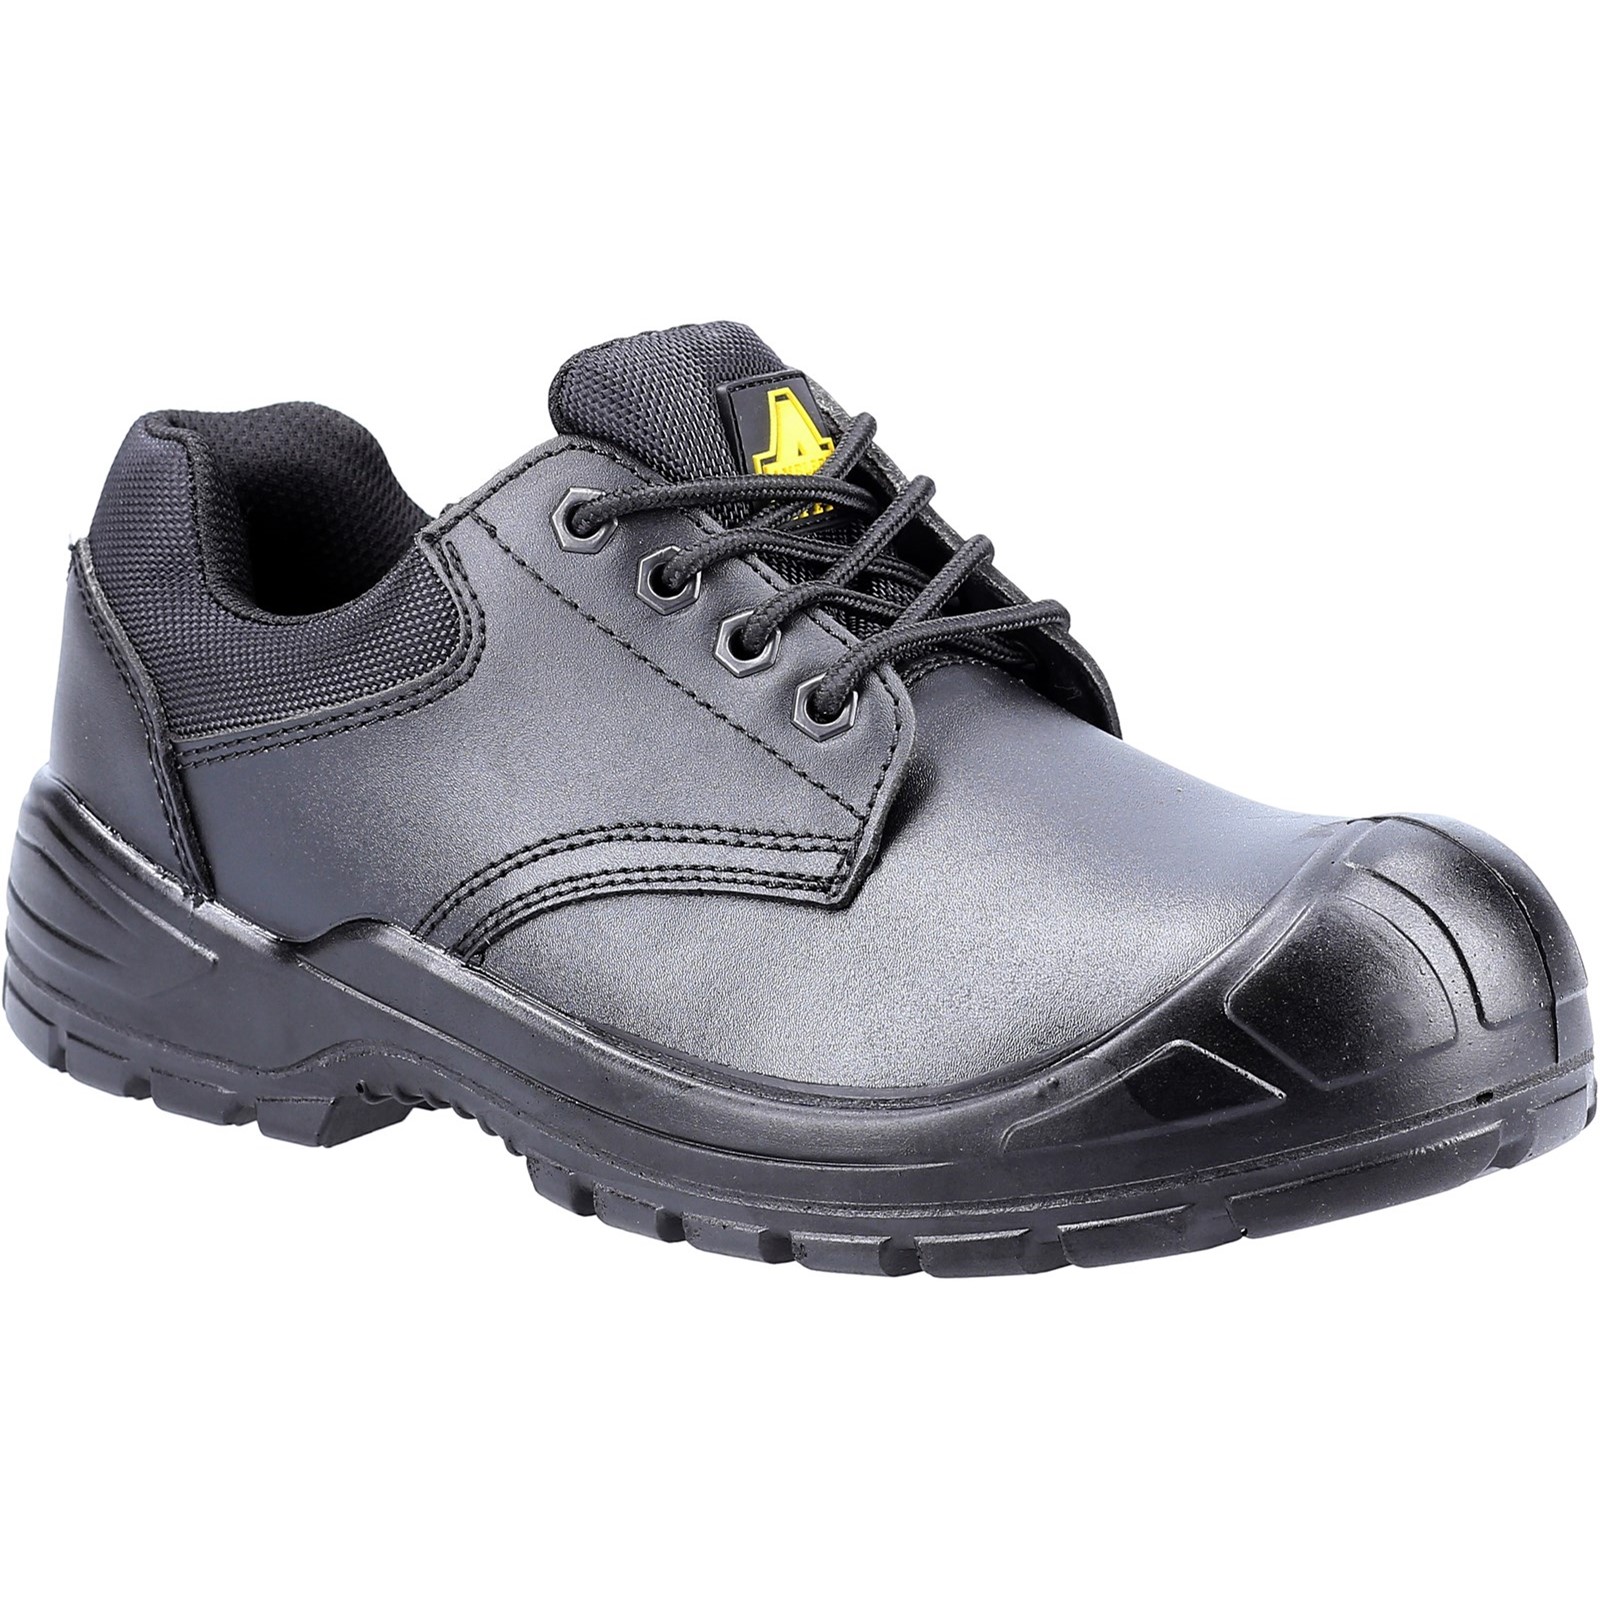 AS66 Safety Shoe